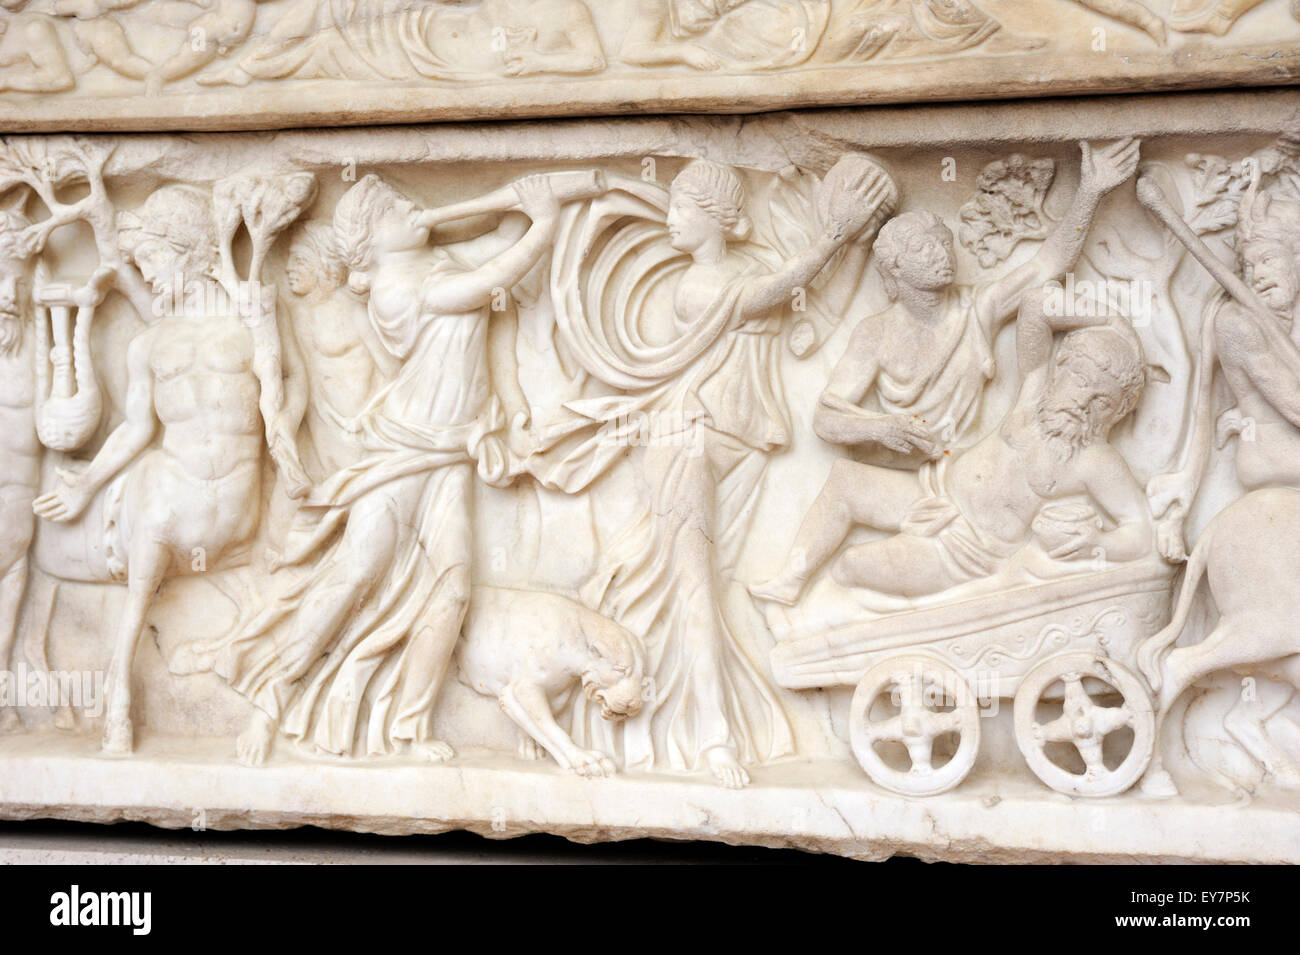 Italie, Rome, terme di Diocleziano, Museo Nazionale Romano, National Roman Museum, sarcophage romain bas relief Banque D'Images